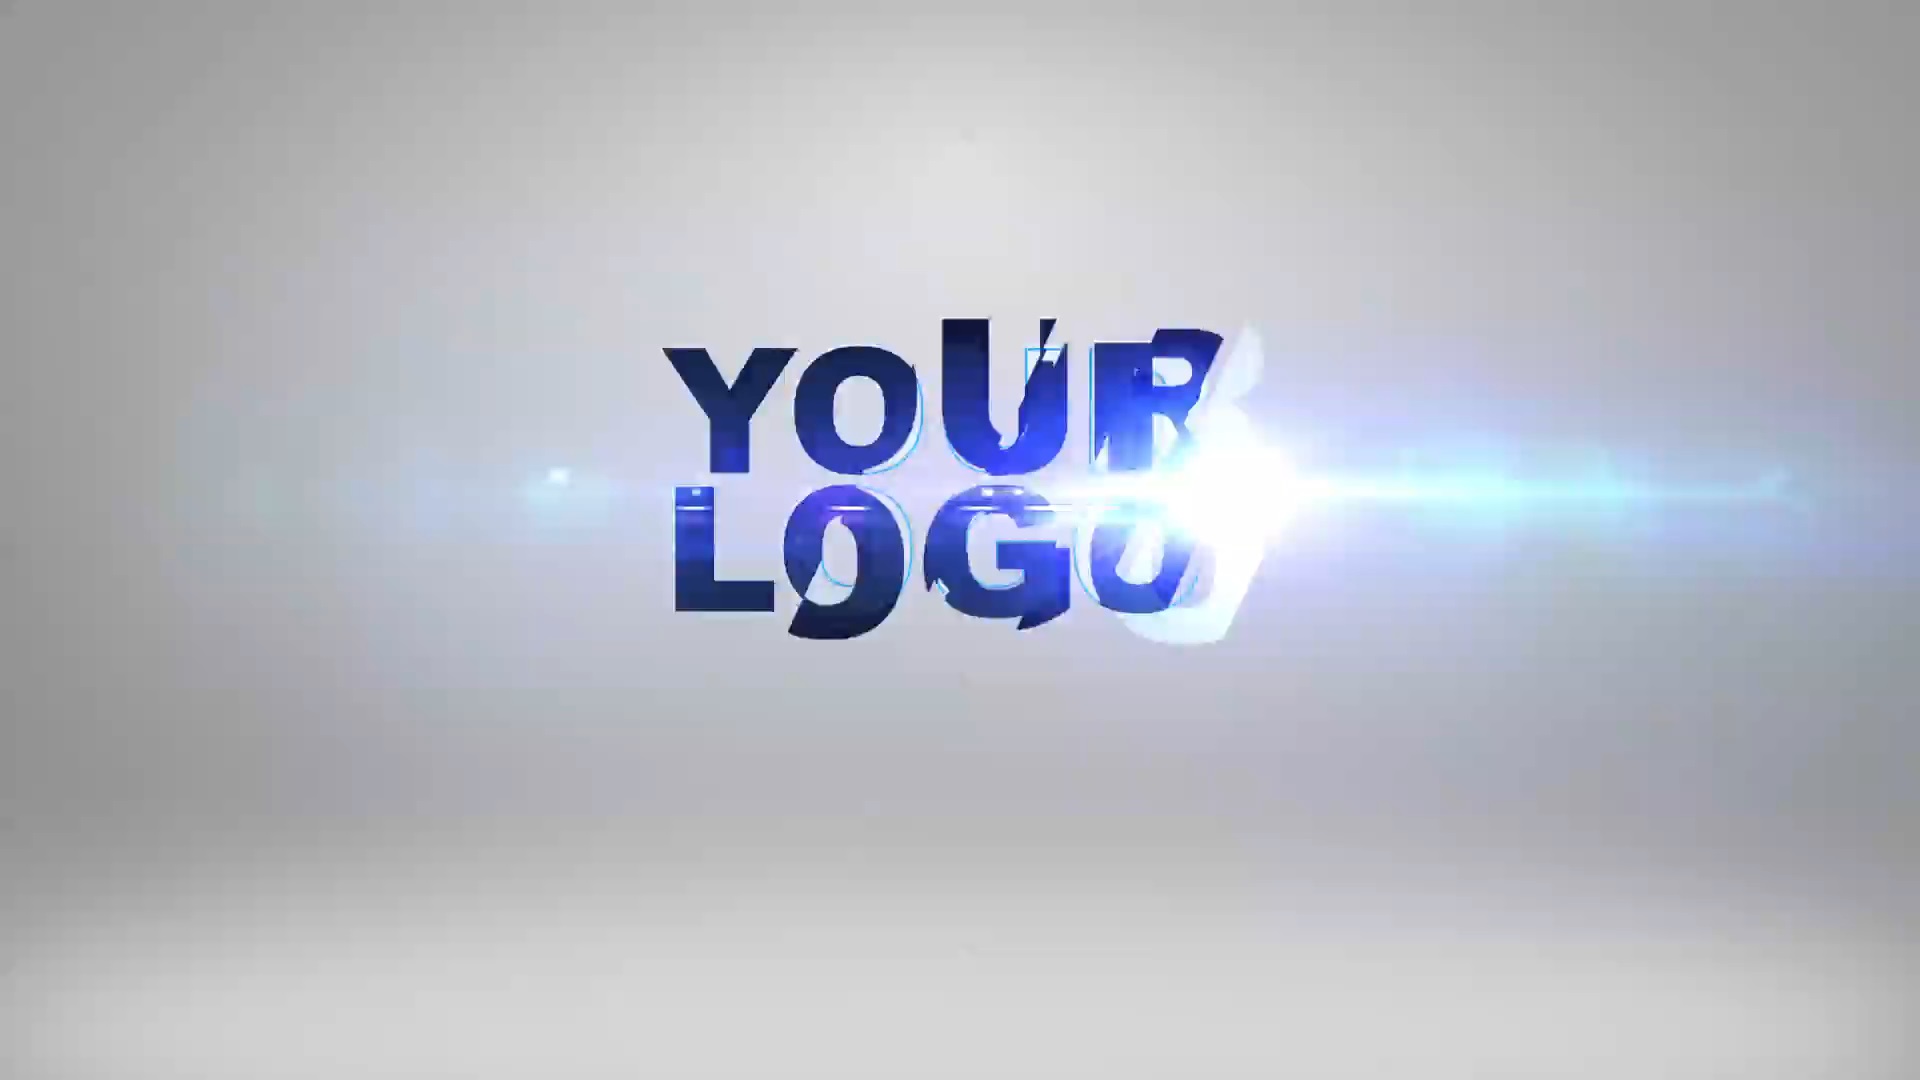 3D Video logo intro Buy two get two Free for 5 for $5 - SEOClerks